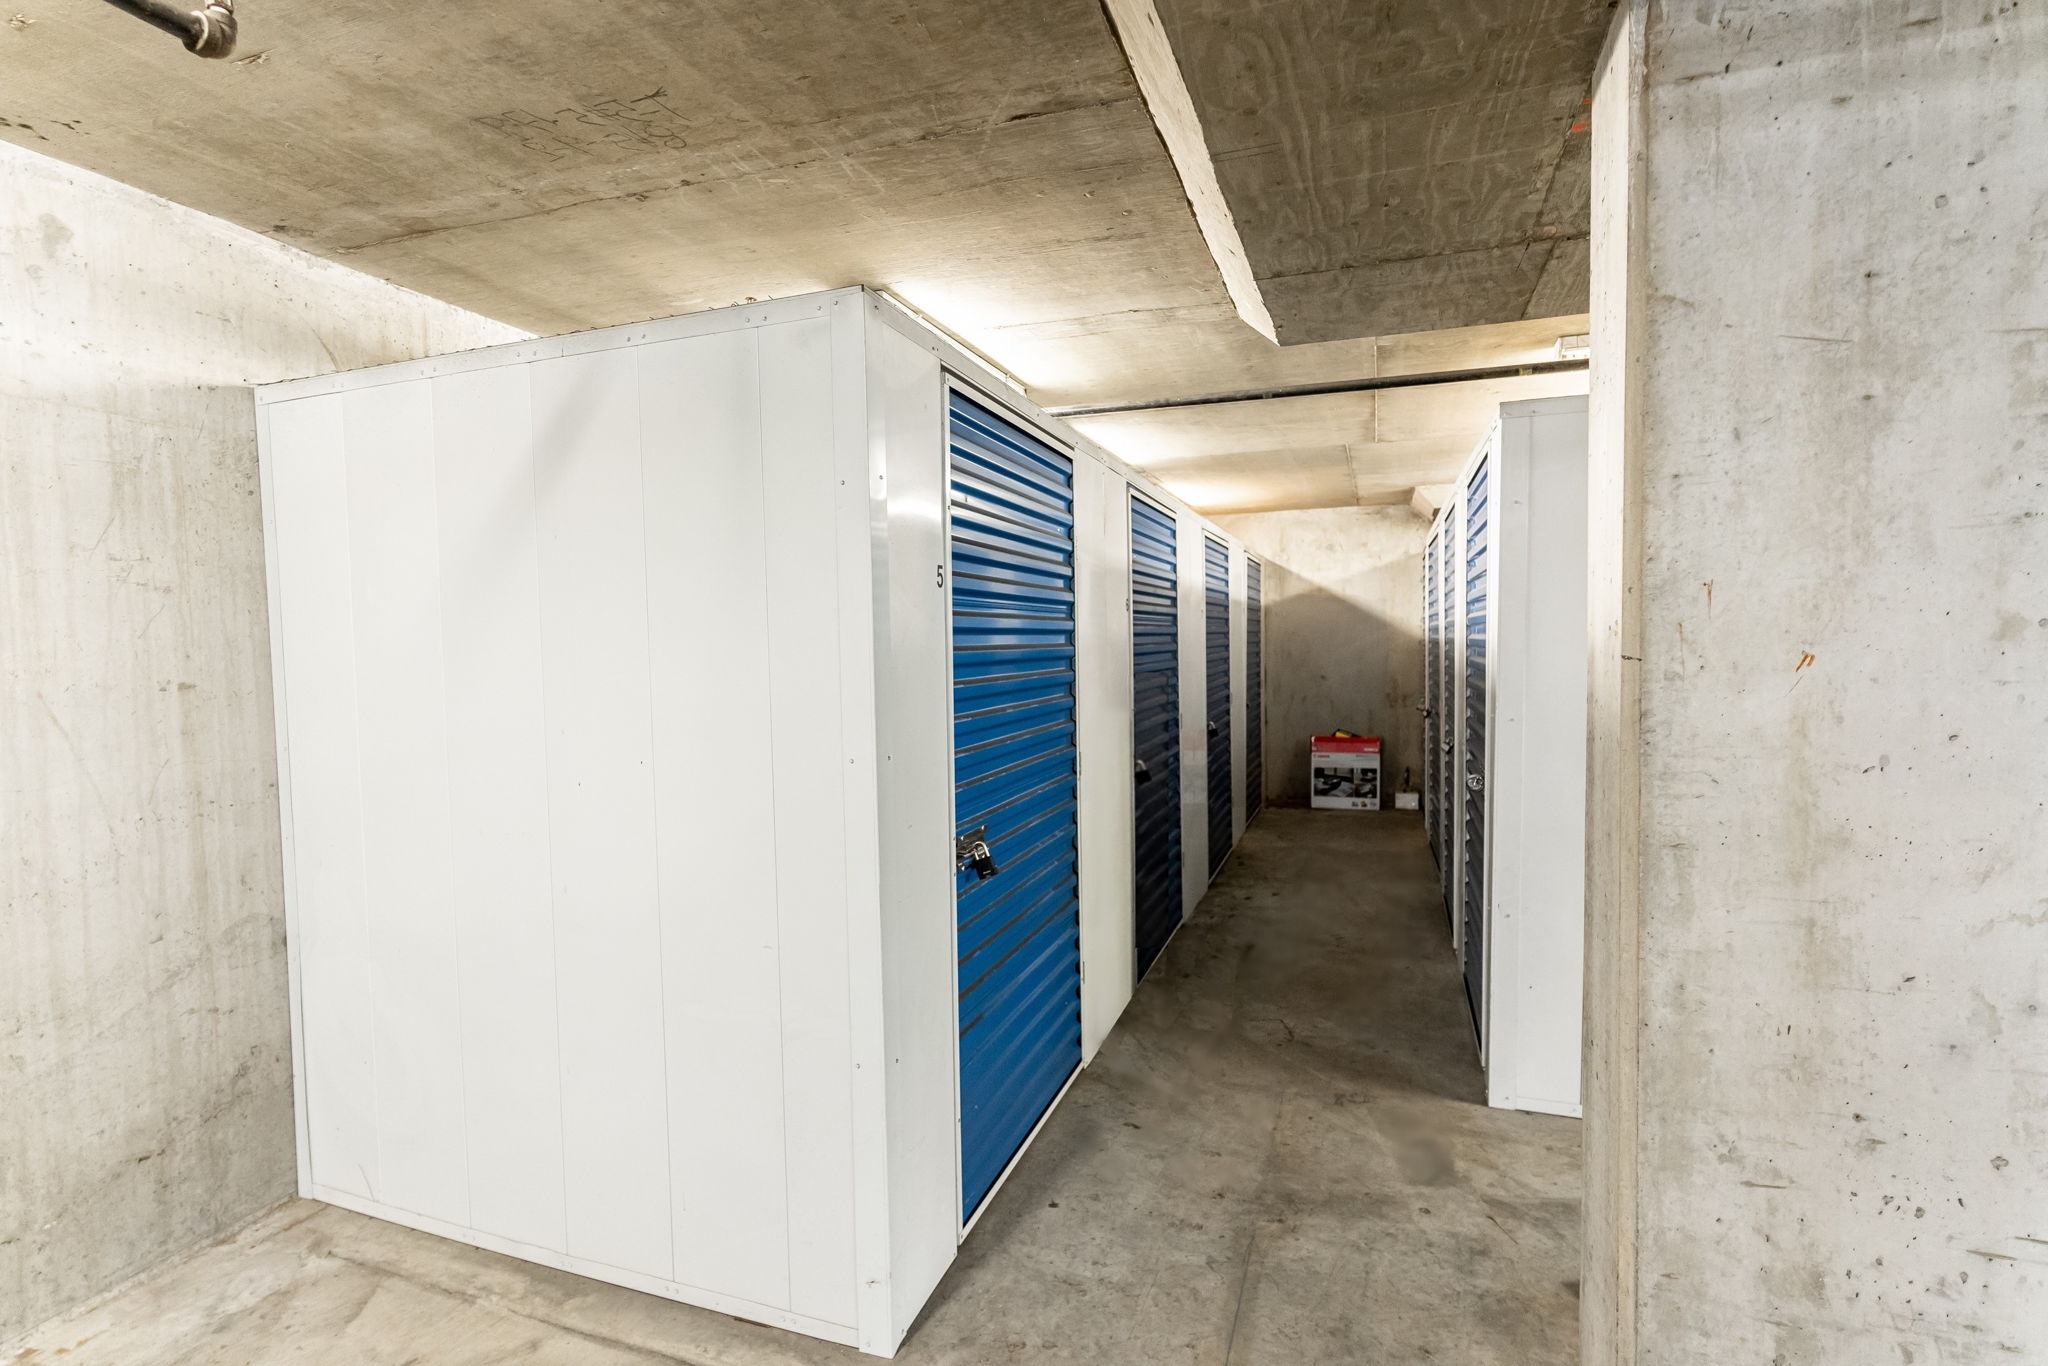 ***GARAGE PARKING SPACE AND Secure Storage Unit